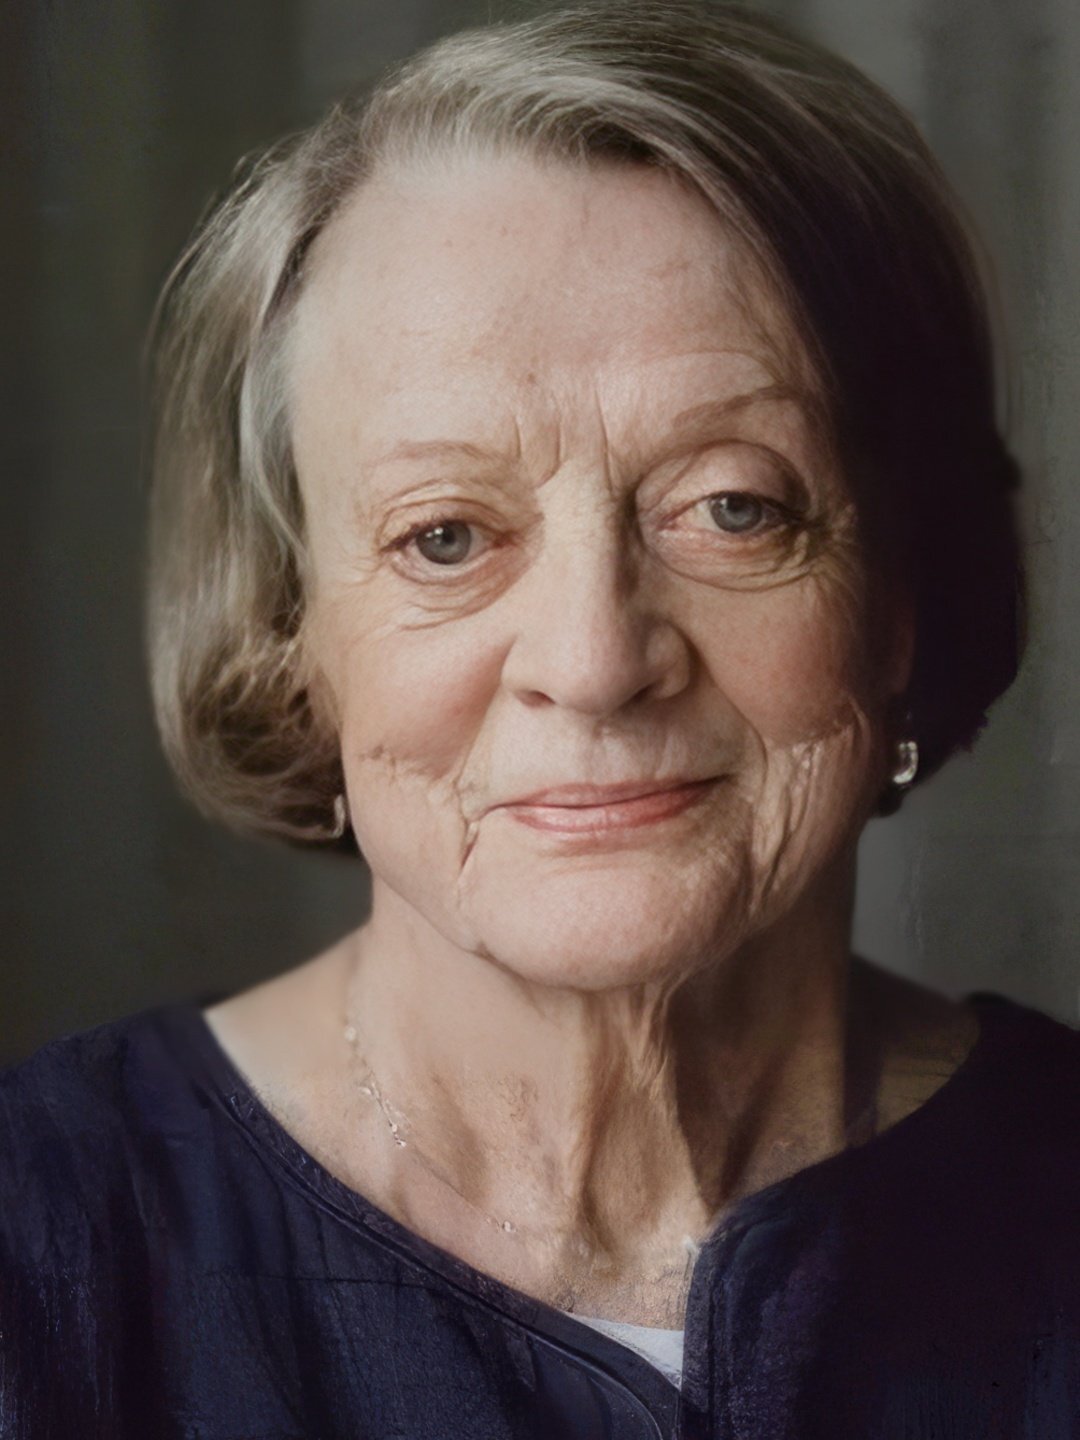 Maggie Smith where did she study